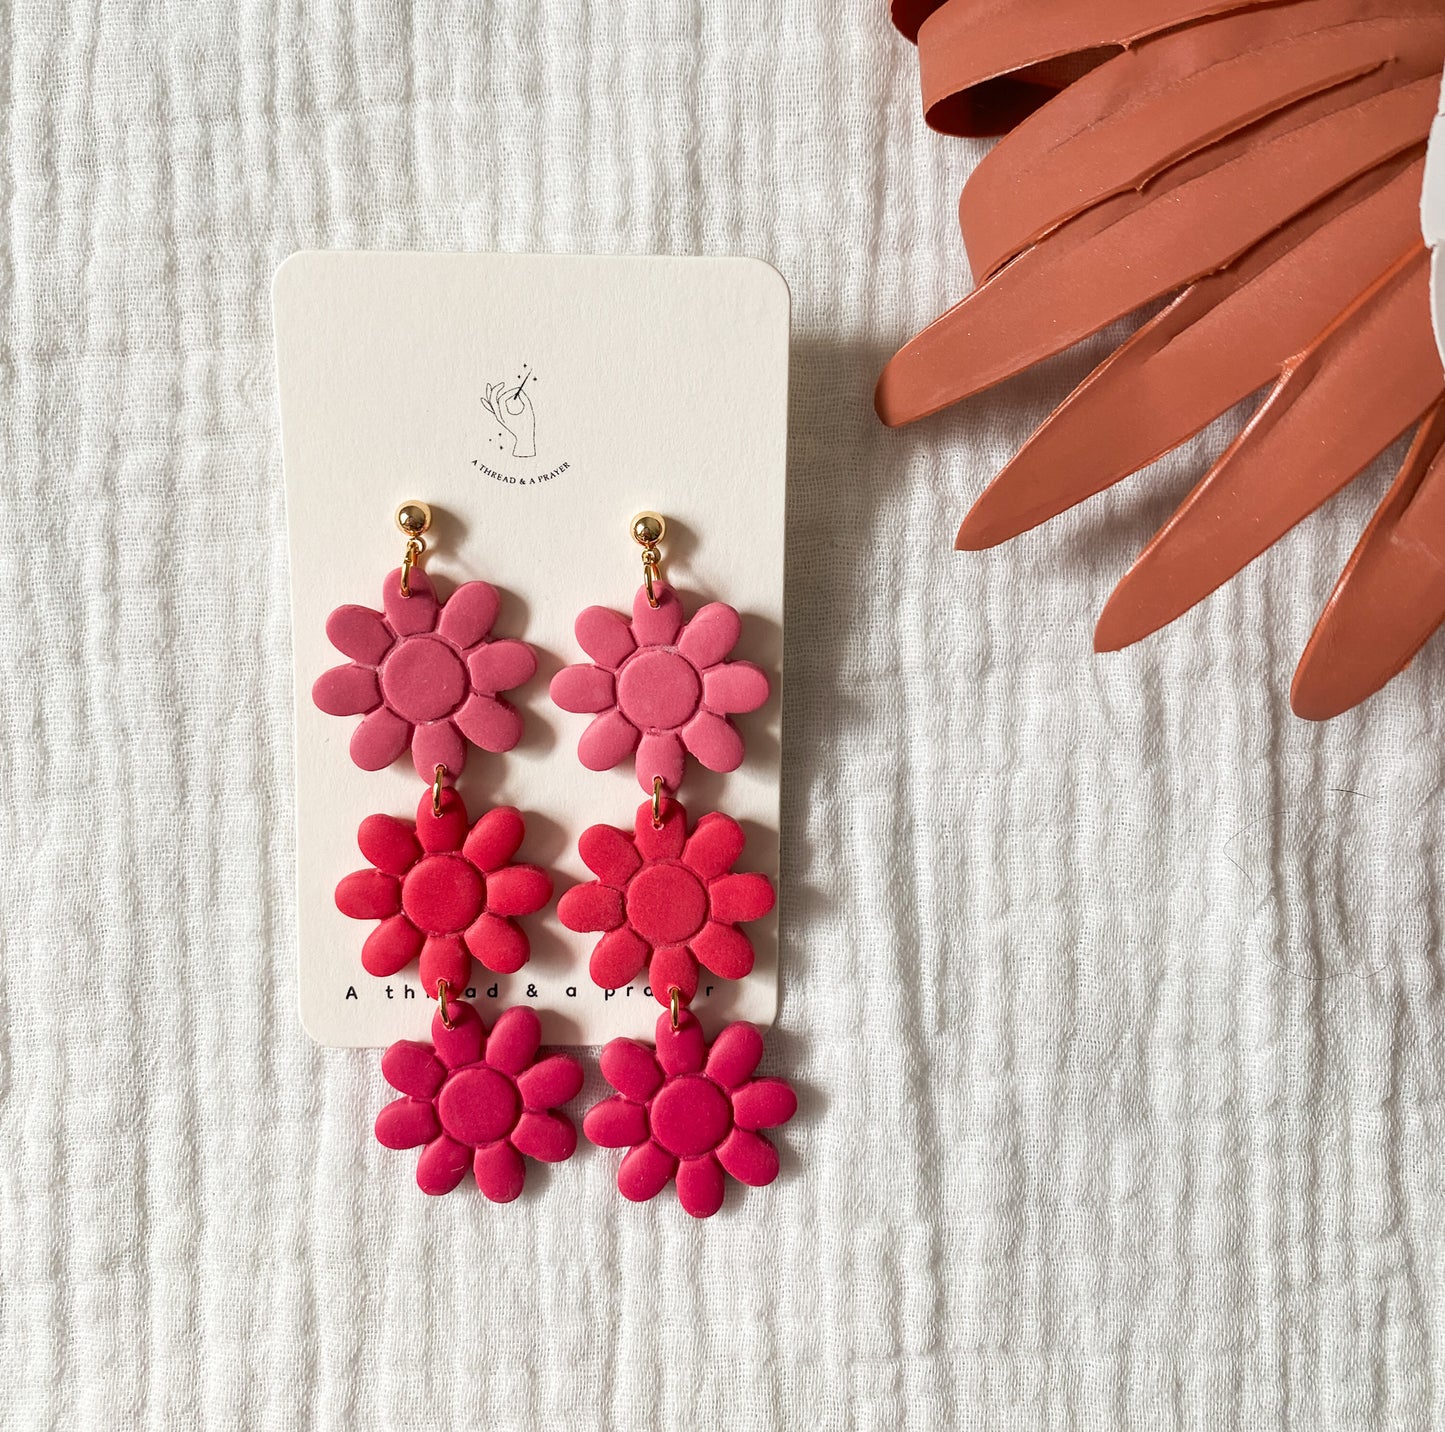 Cute as Heck Summer Neon Styles | Summer Earrings | Bright Neon Colors | Fun and Funky Summer Clay Earrings